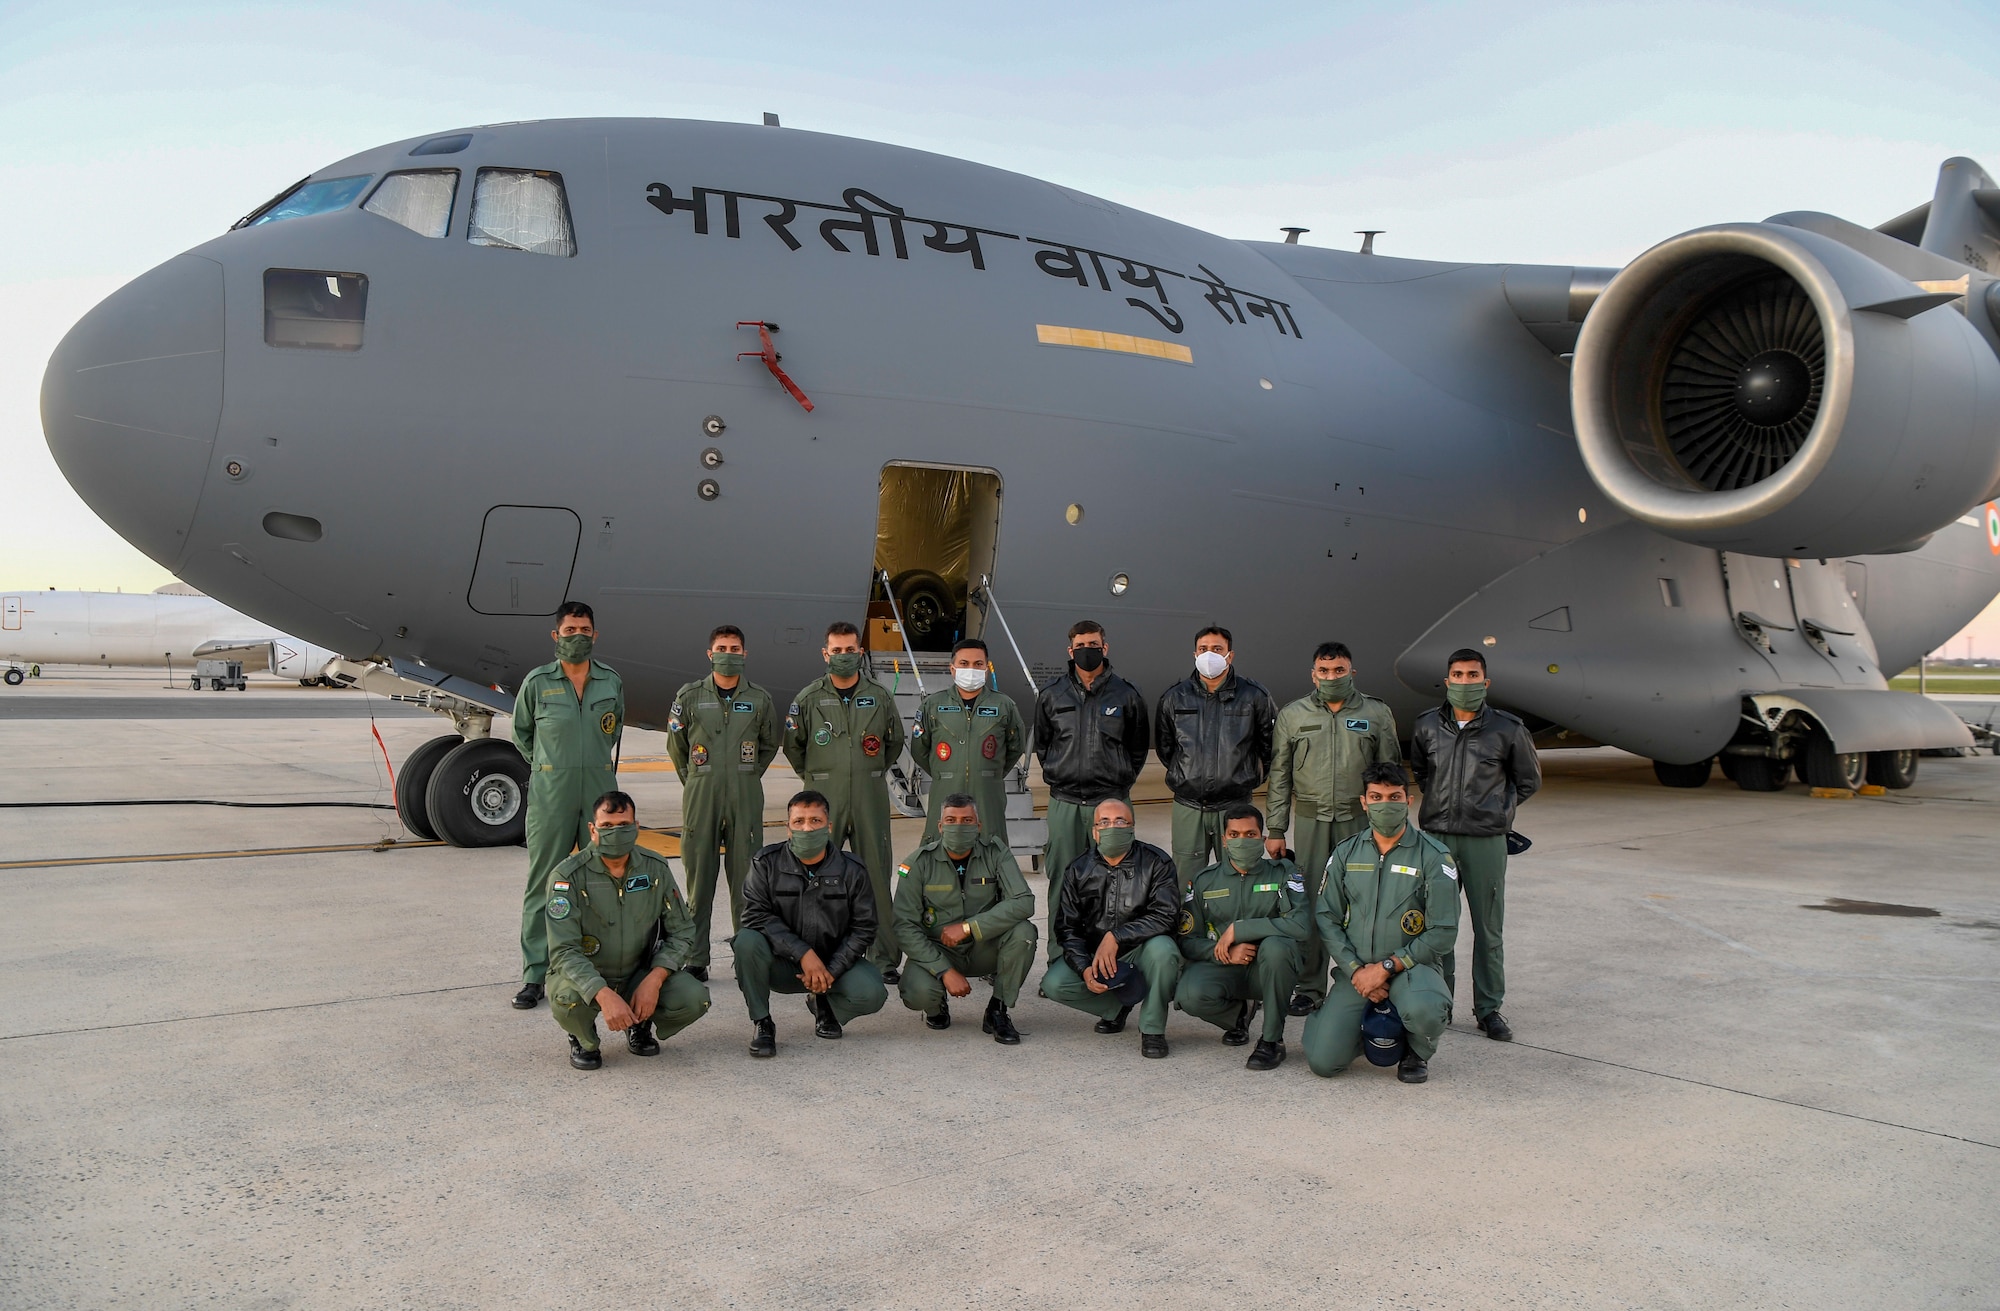 Indian Air Force 28th Wing members pose for a group photo at Dover Air Force Base, Delaware, Nov. 20, 2020. The U.S. strengthens its international partnerships through foreign military sales. Dover AFB actively supports $3.5 billion worth of FMS due to its strategic location and 436th Aerial Port Squadron, the largest aerial port in the Department of Defense. As the world’s oldest and largest democracies, the United States and India share a commitment to freedom, human rights and rule of law. (U.S. Air Force photo by Senior Airman Christopher Quail)